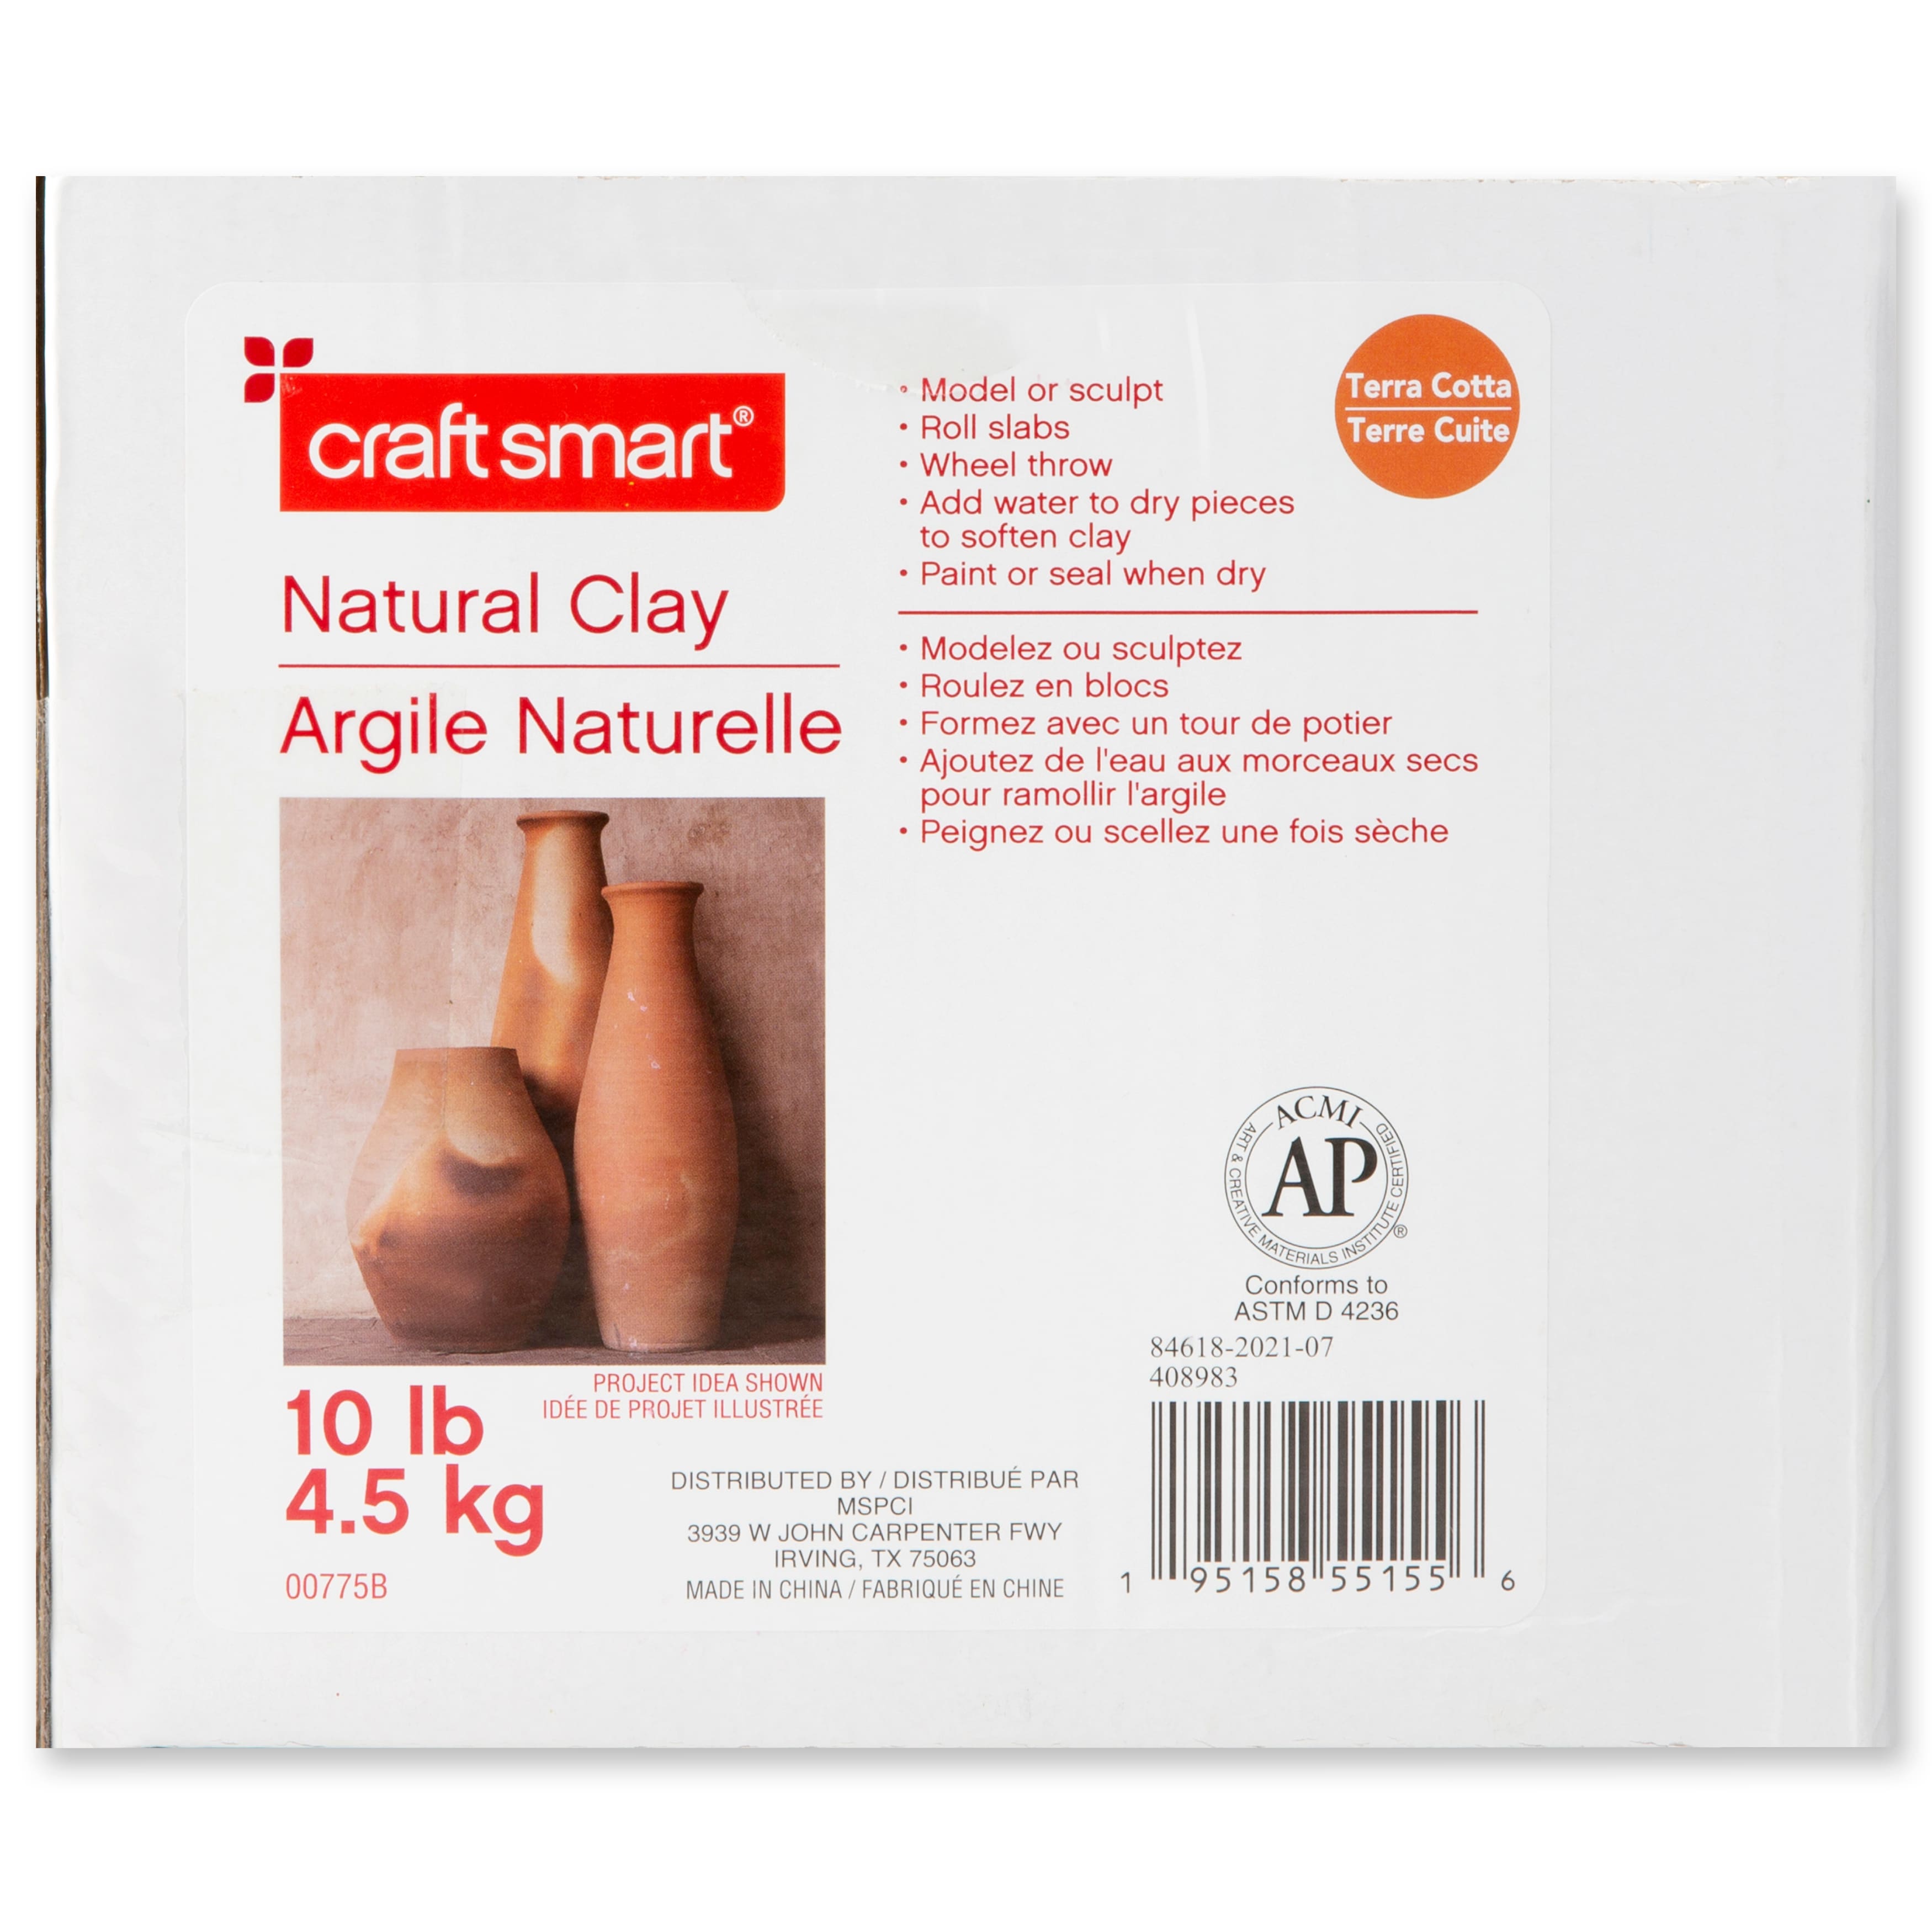 Foam Clay Air Dry Foam Modeling Clay (10.58oz) - Wet Soft, Soft, Air Dry -  Used For Cosplay, Molding Clay Carving